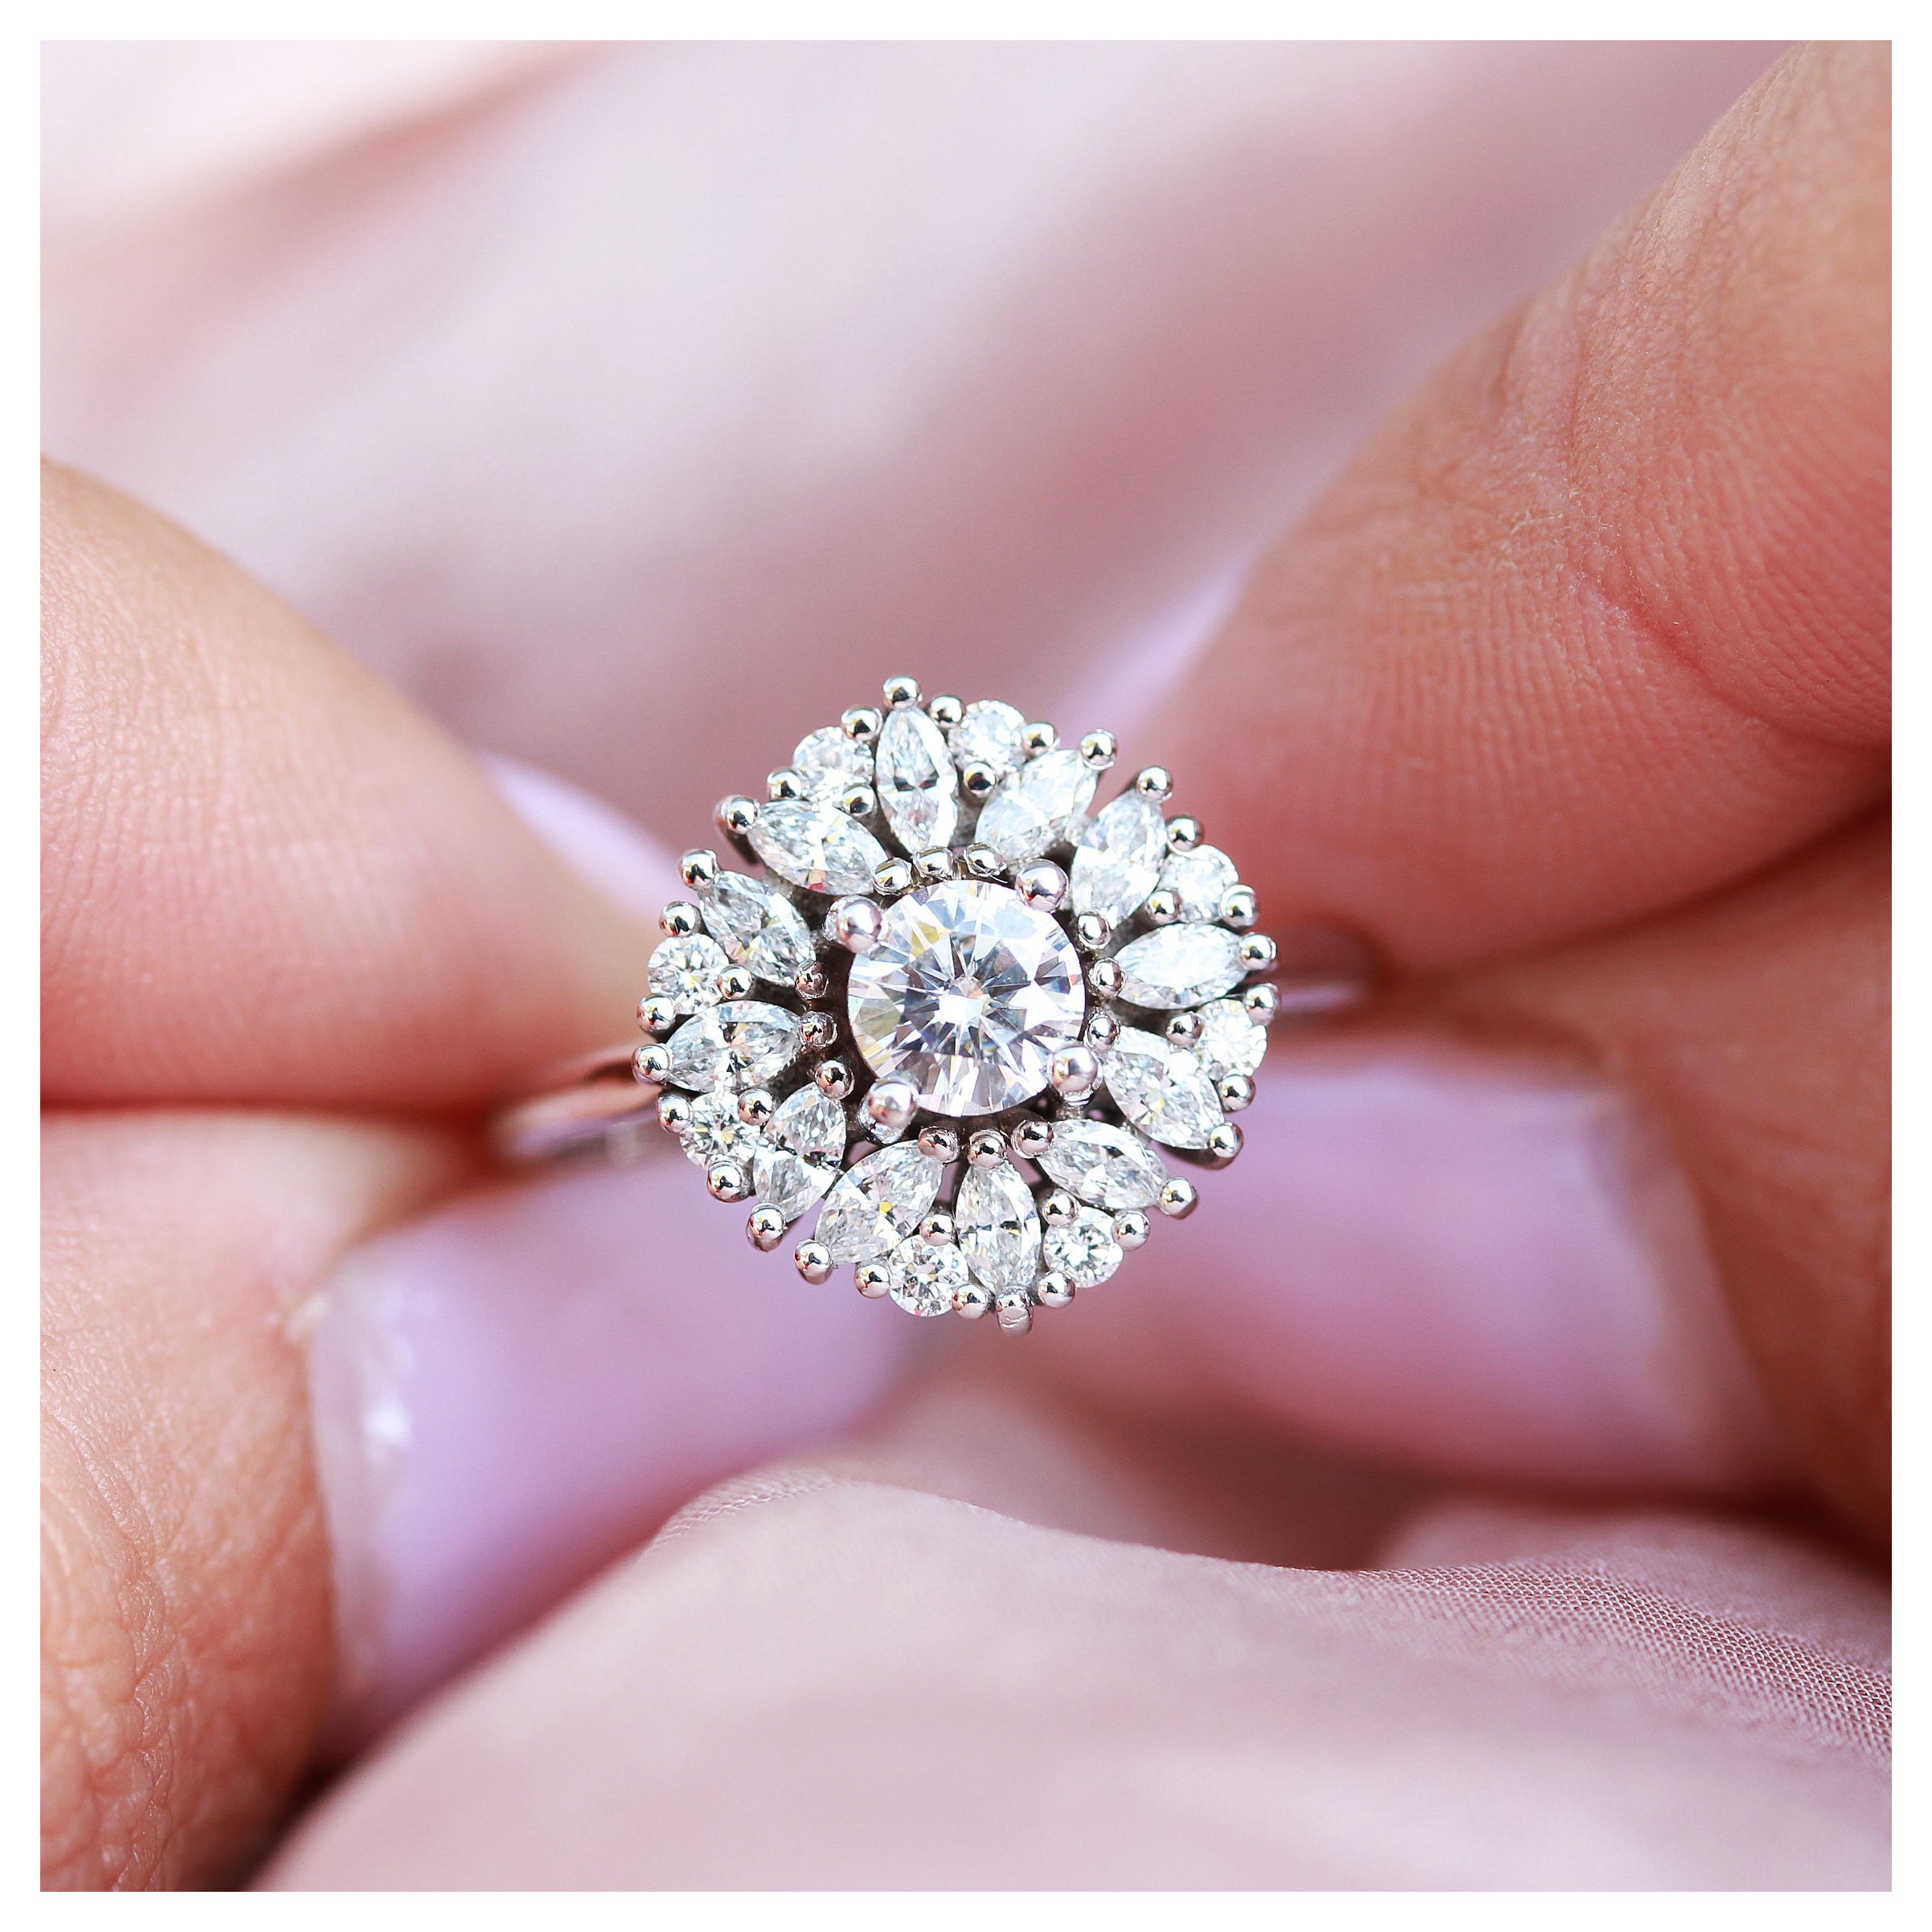 Round Moissanite Engagement Ring in 14K White Gold - "Harper", Ready to Ship For Sale